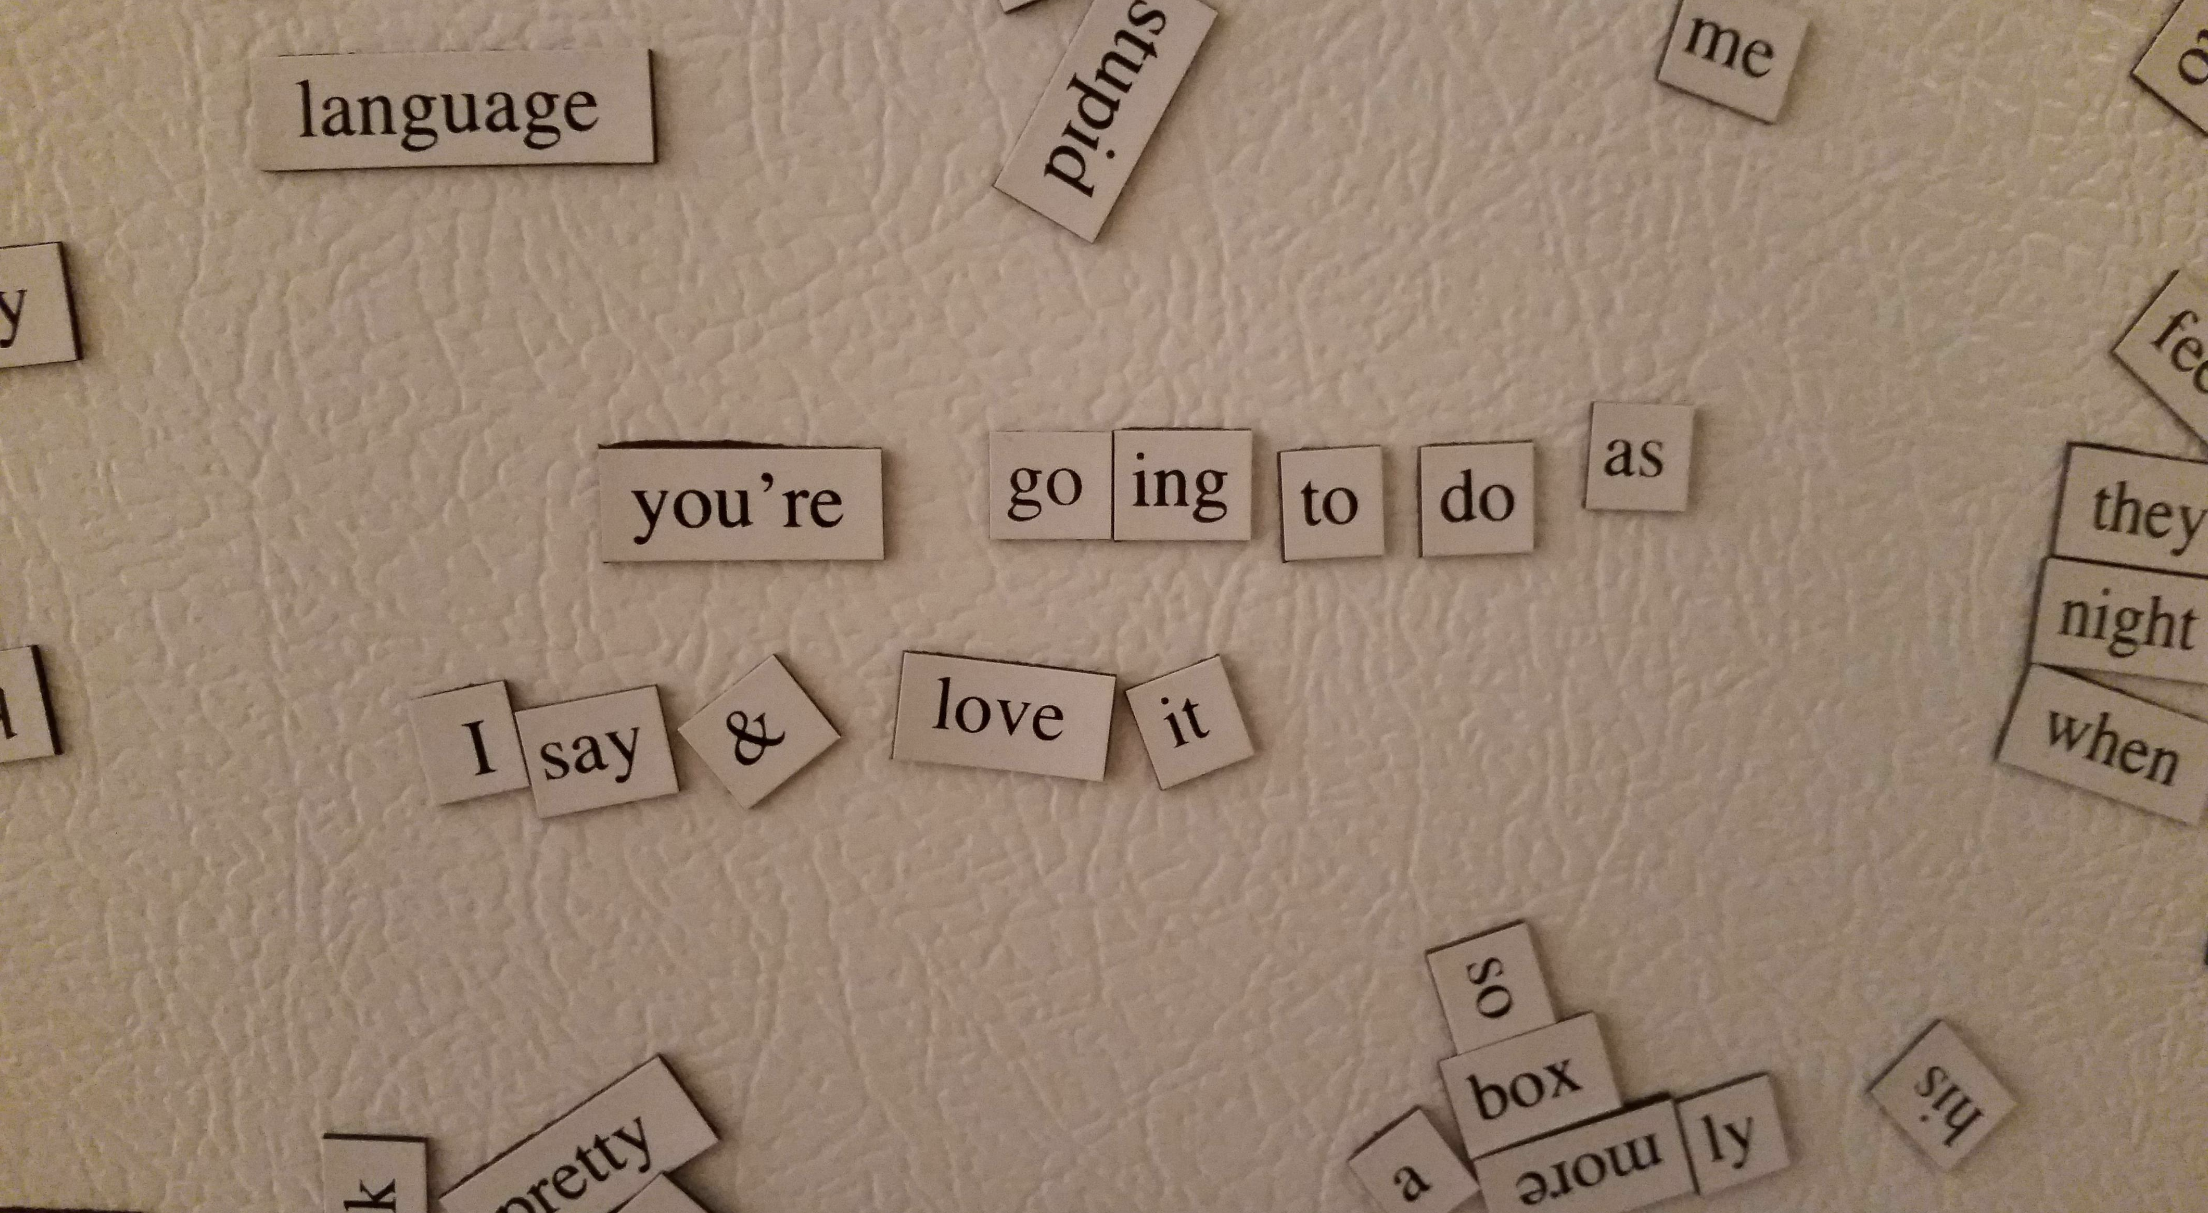 Magnets have been placed on the refrigerator so that they spelled out &quot;you&#x27;re going to do as I say and love it&quot;